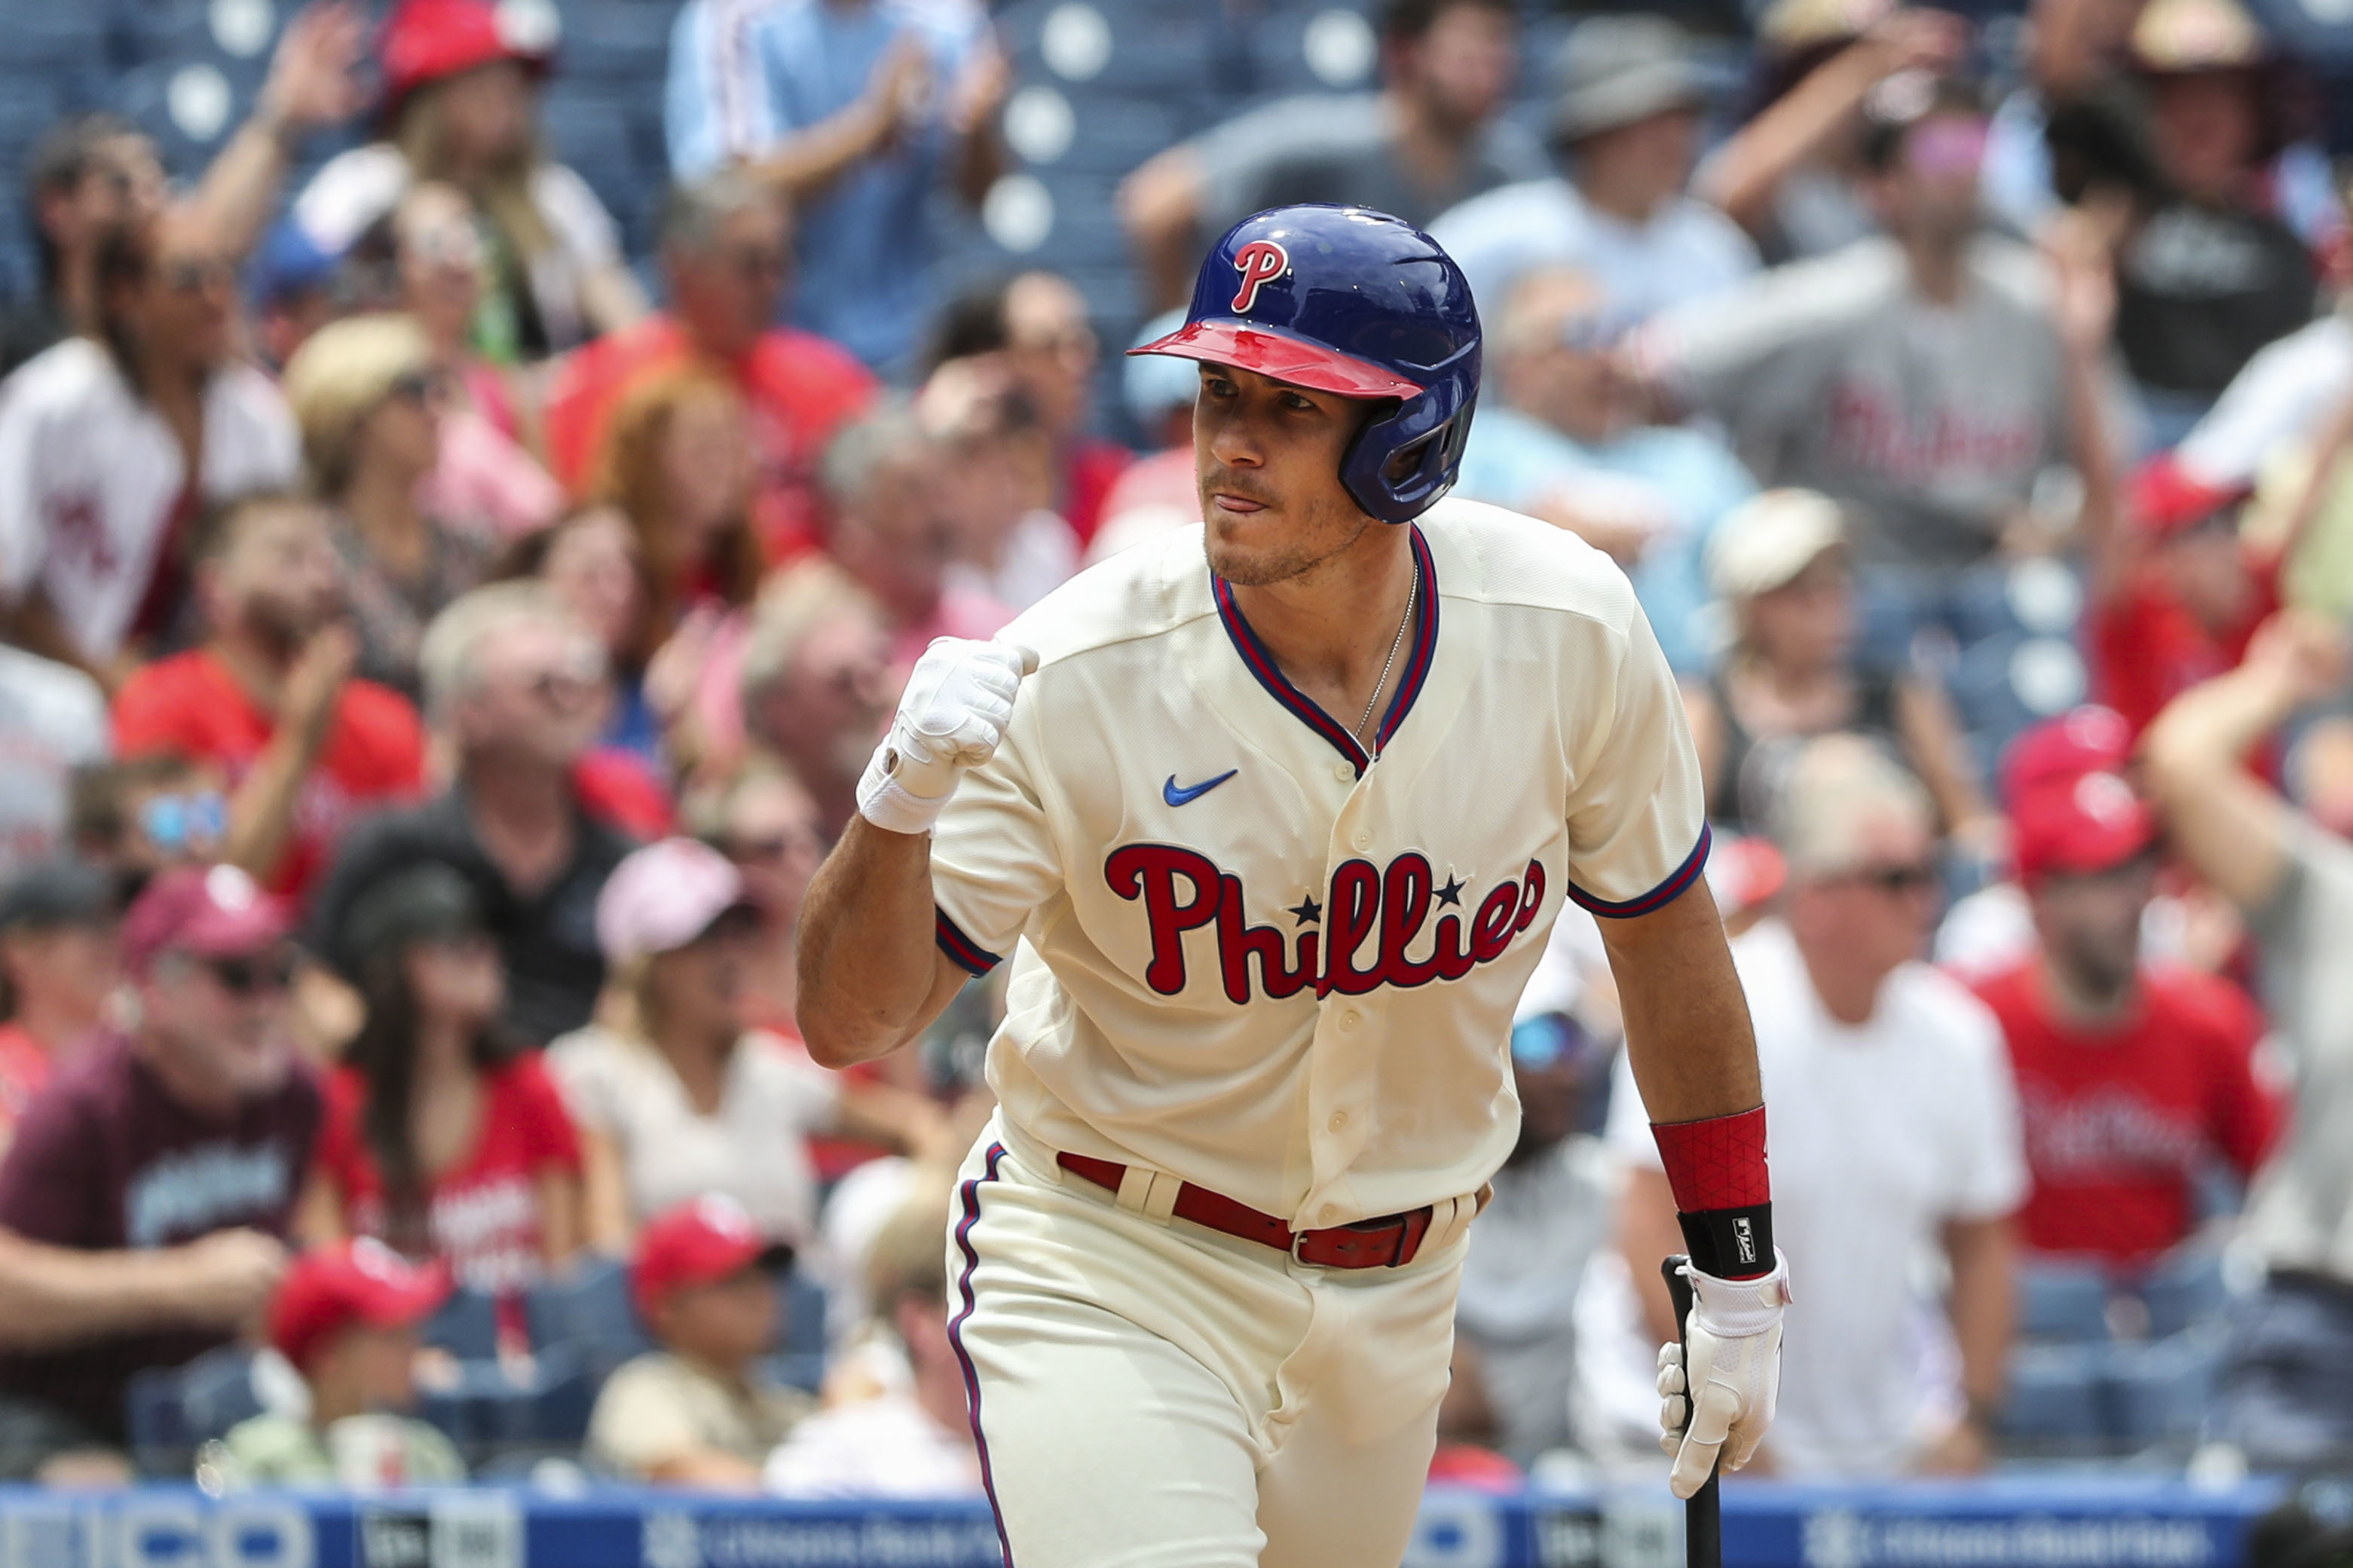 Phillies pull to within two games of first place with a doubleheader sweep  of sorts over the Marlins